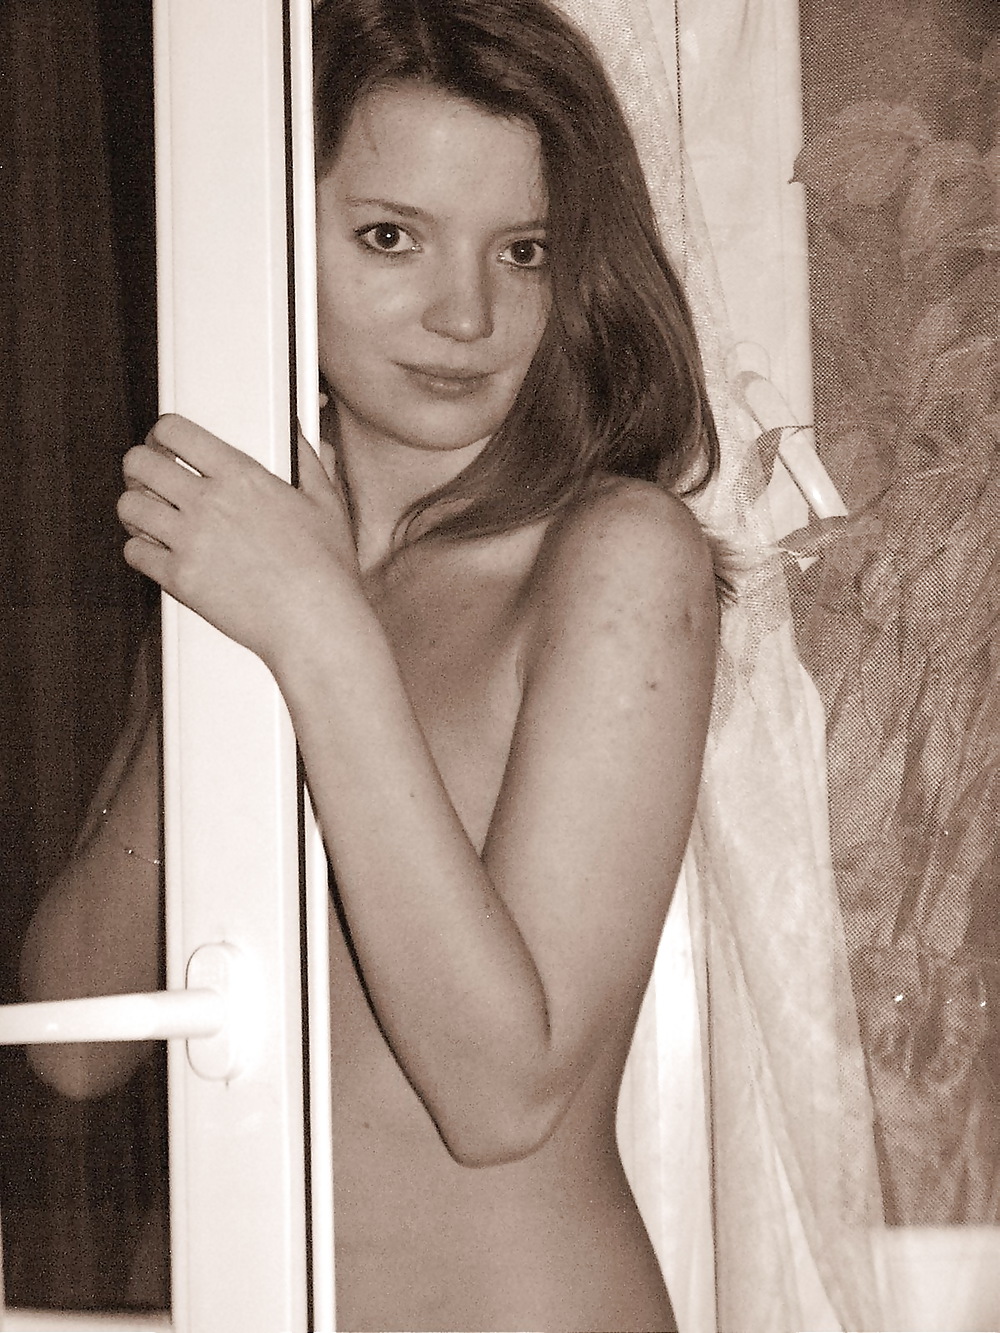 All of Hot Russian Teen Dasha (Balcony 4of12) pict gal